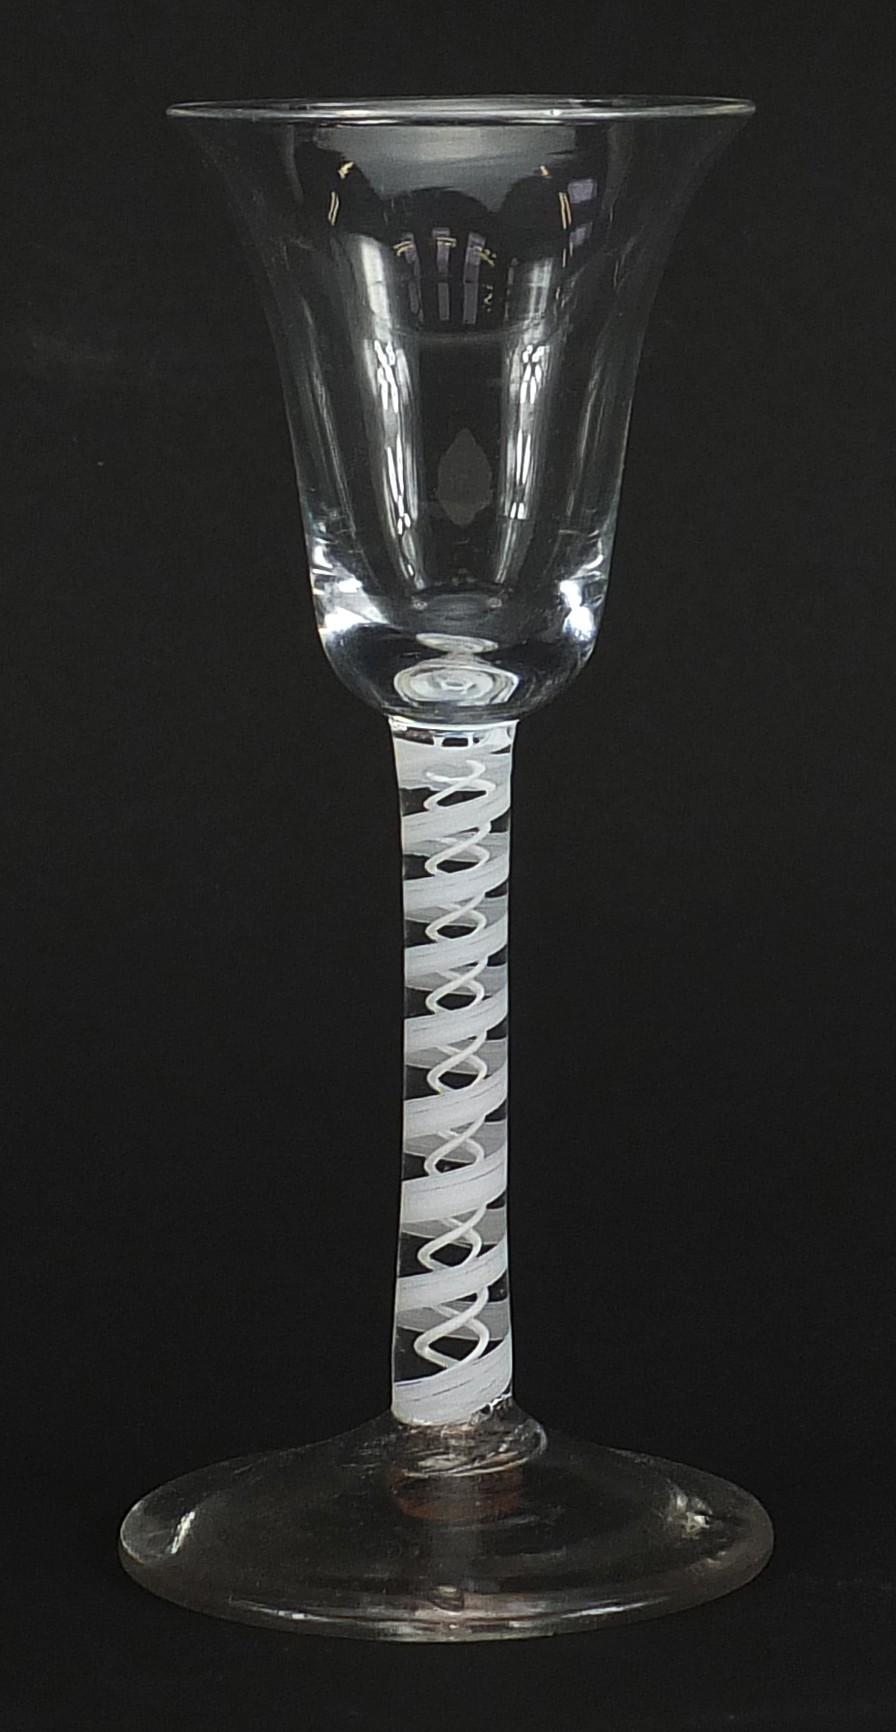 18th century wine glass with multiple opaque twist stem and bell shaped bowl, 16.5cm high